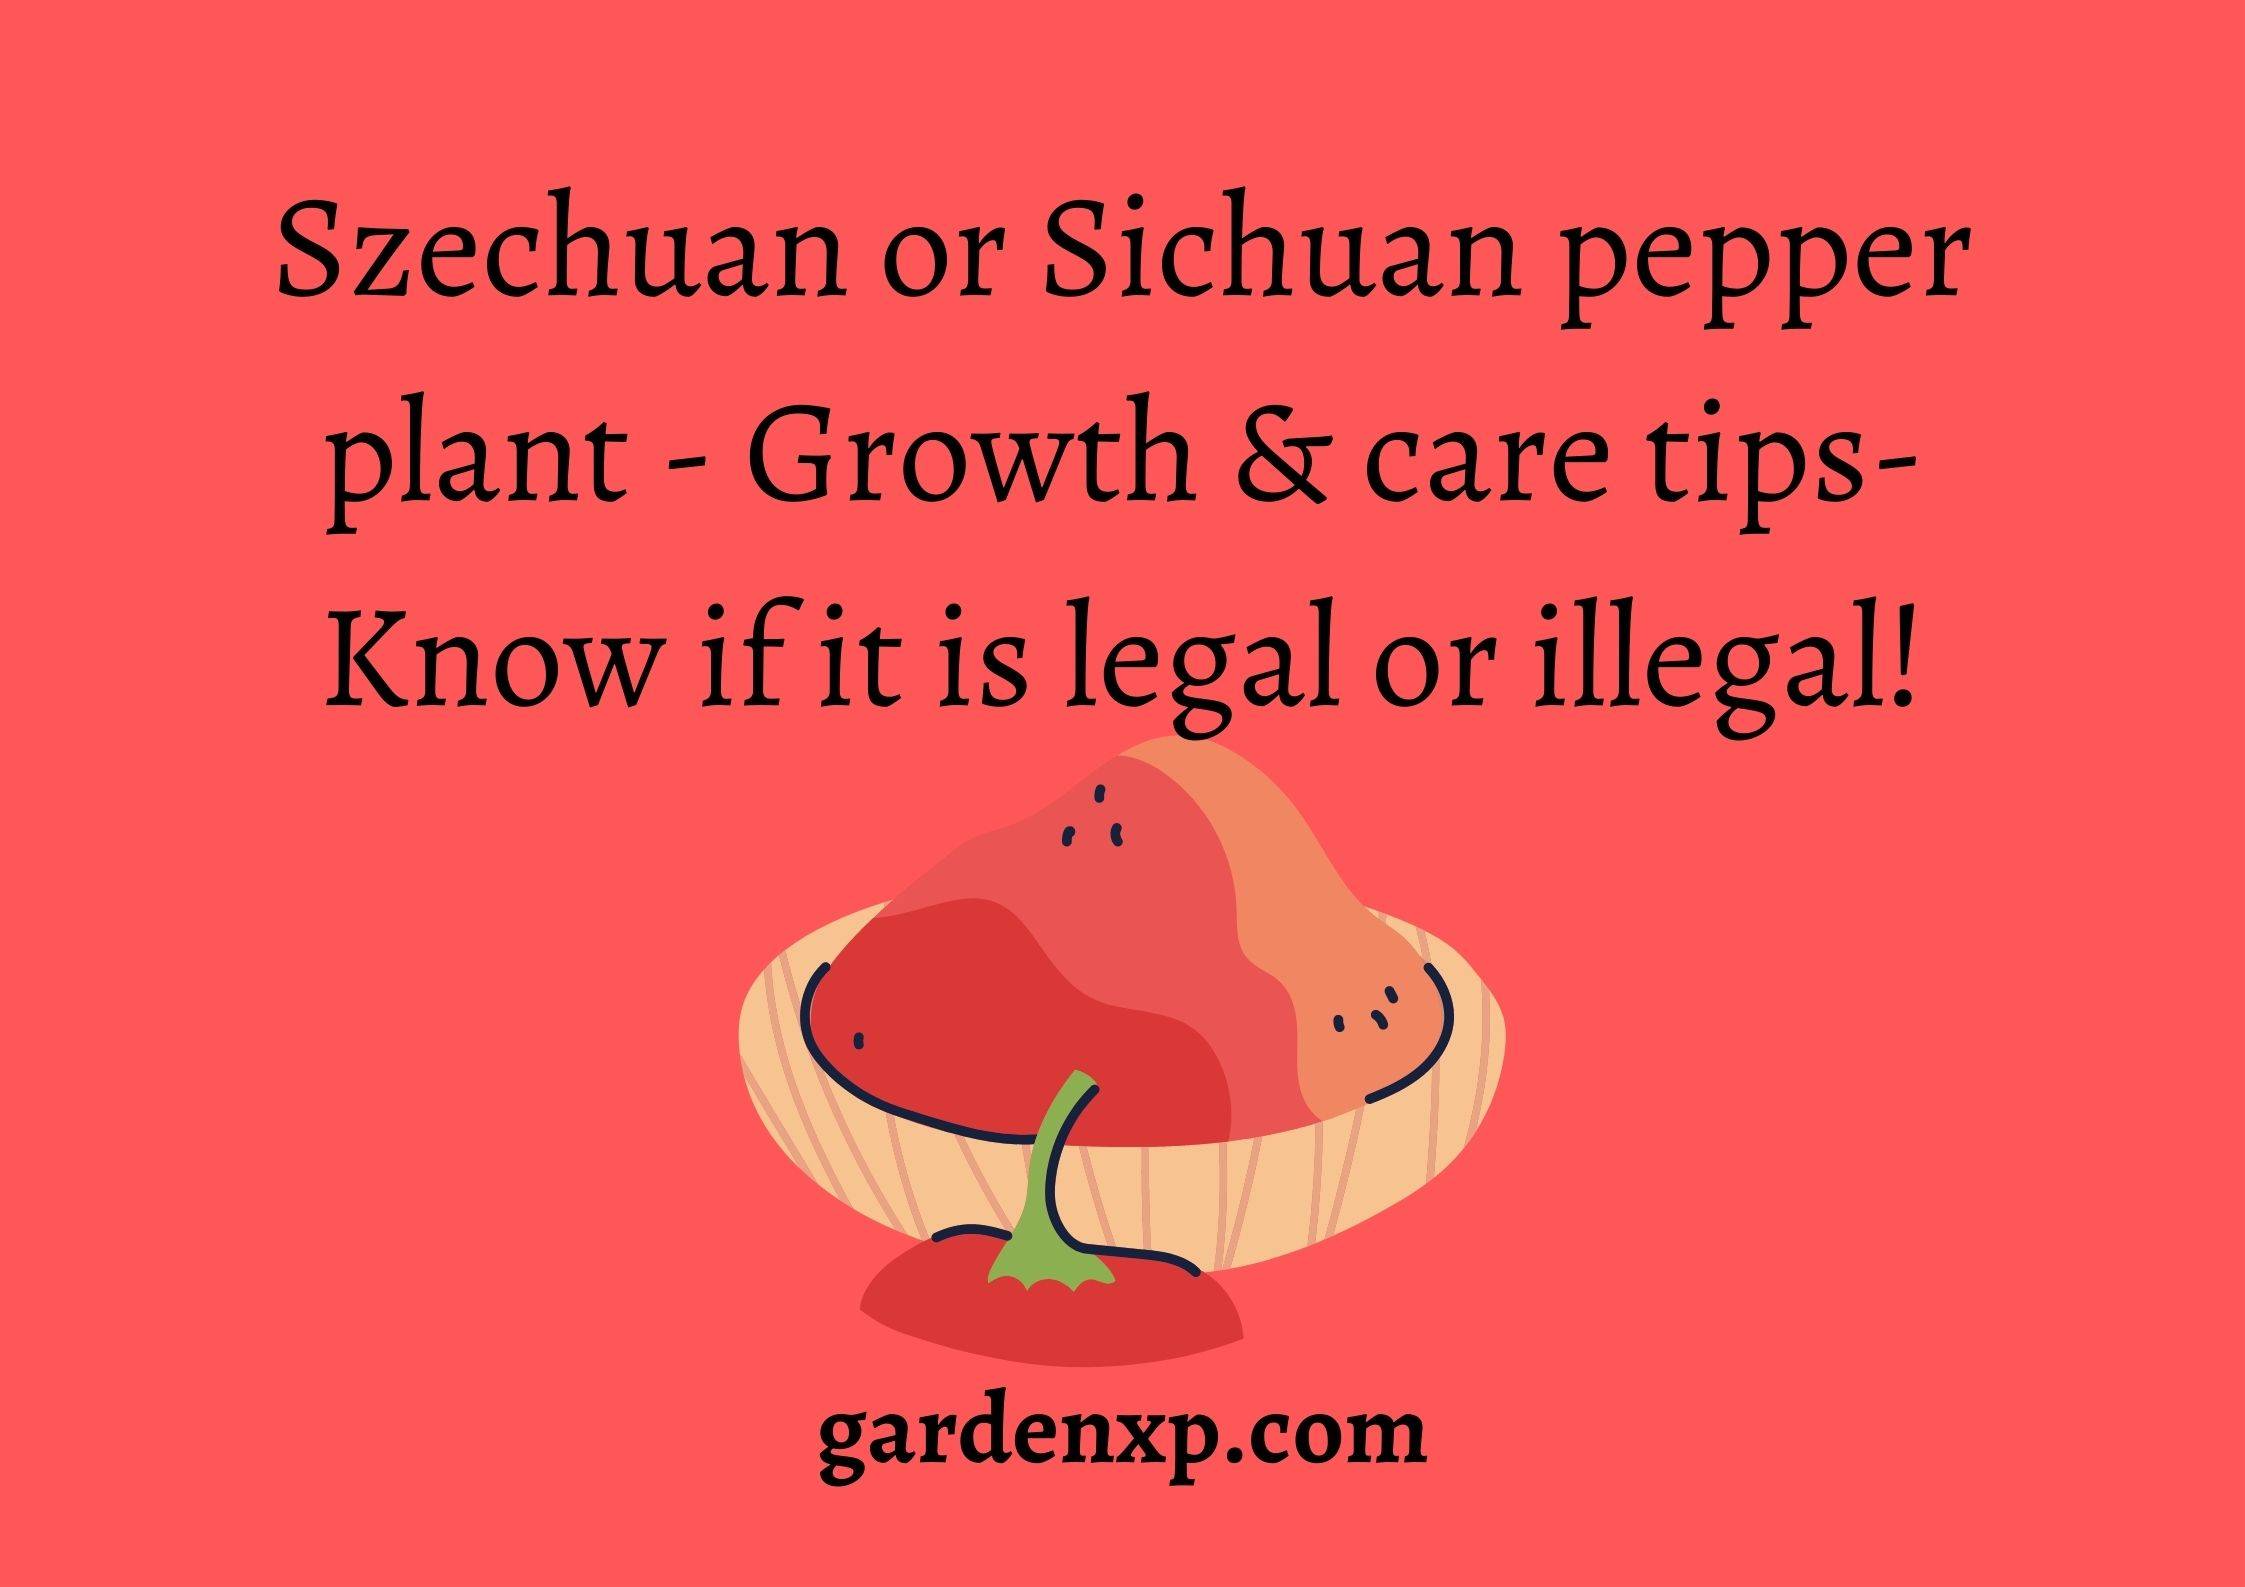 Szechuan or Sichuan Pepper plant - Growth & care tips- Know if it is legal or illegal!